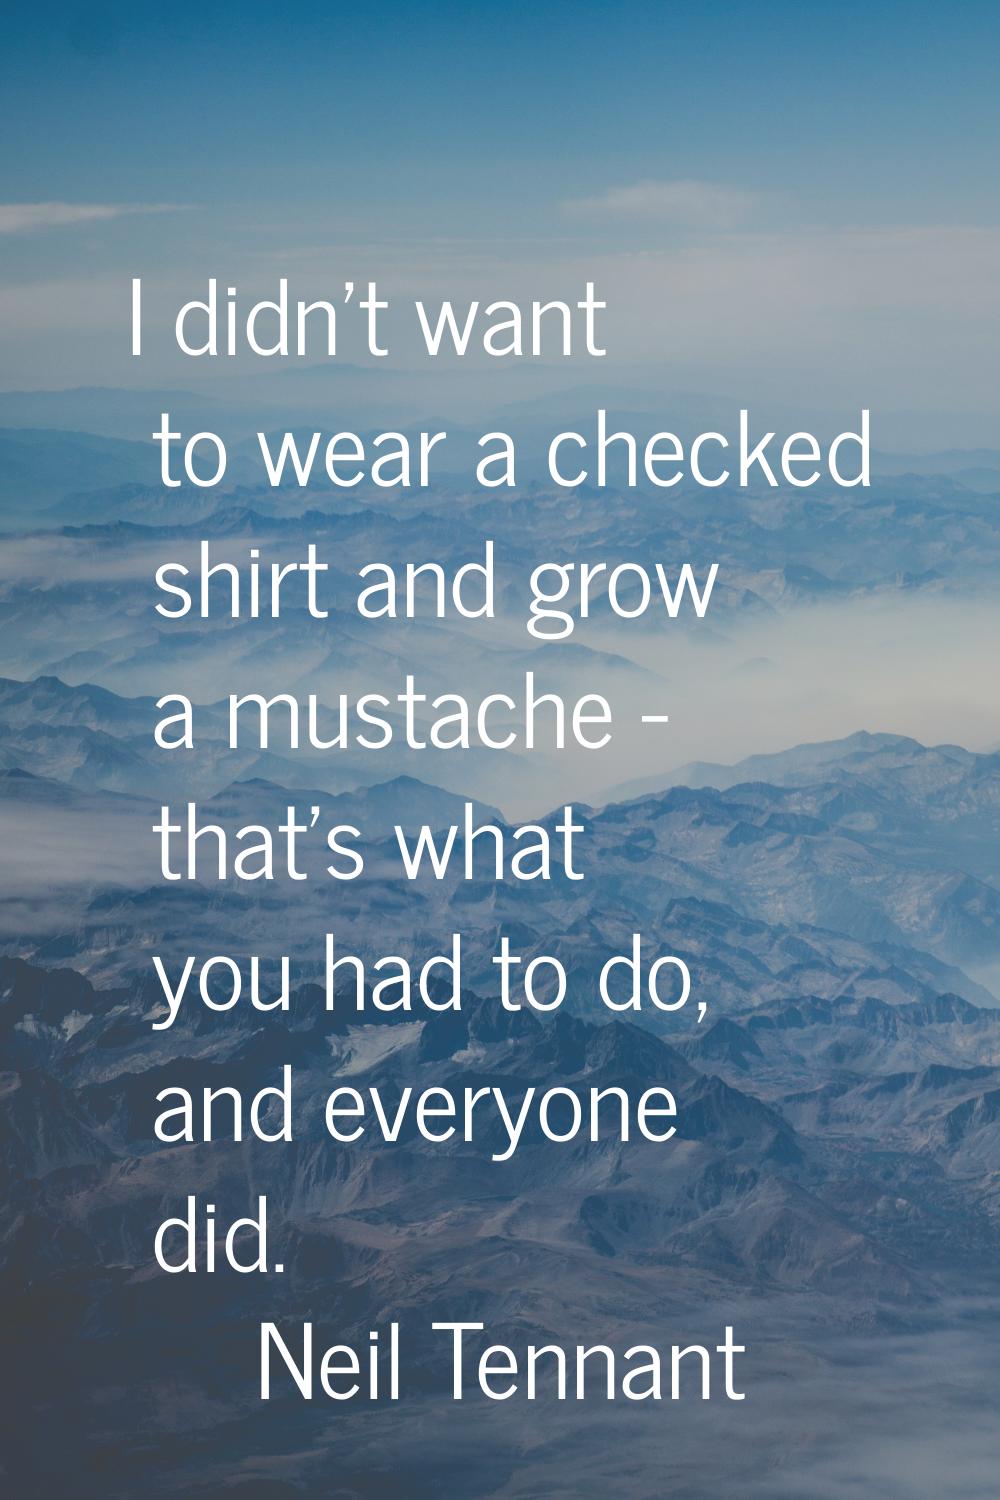 I didn't want to wear a checked shirt and grow a mustache - that's what you had to do, and everyone